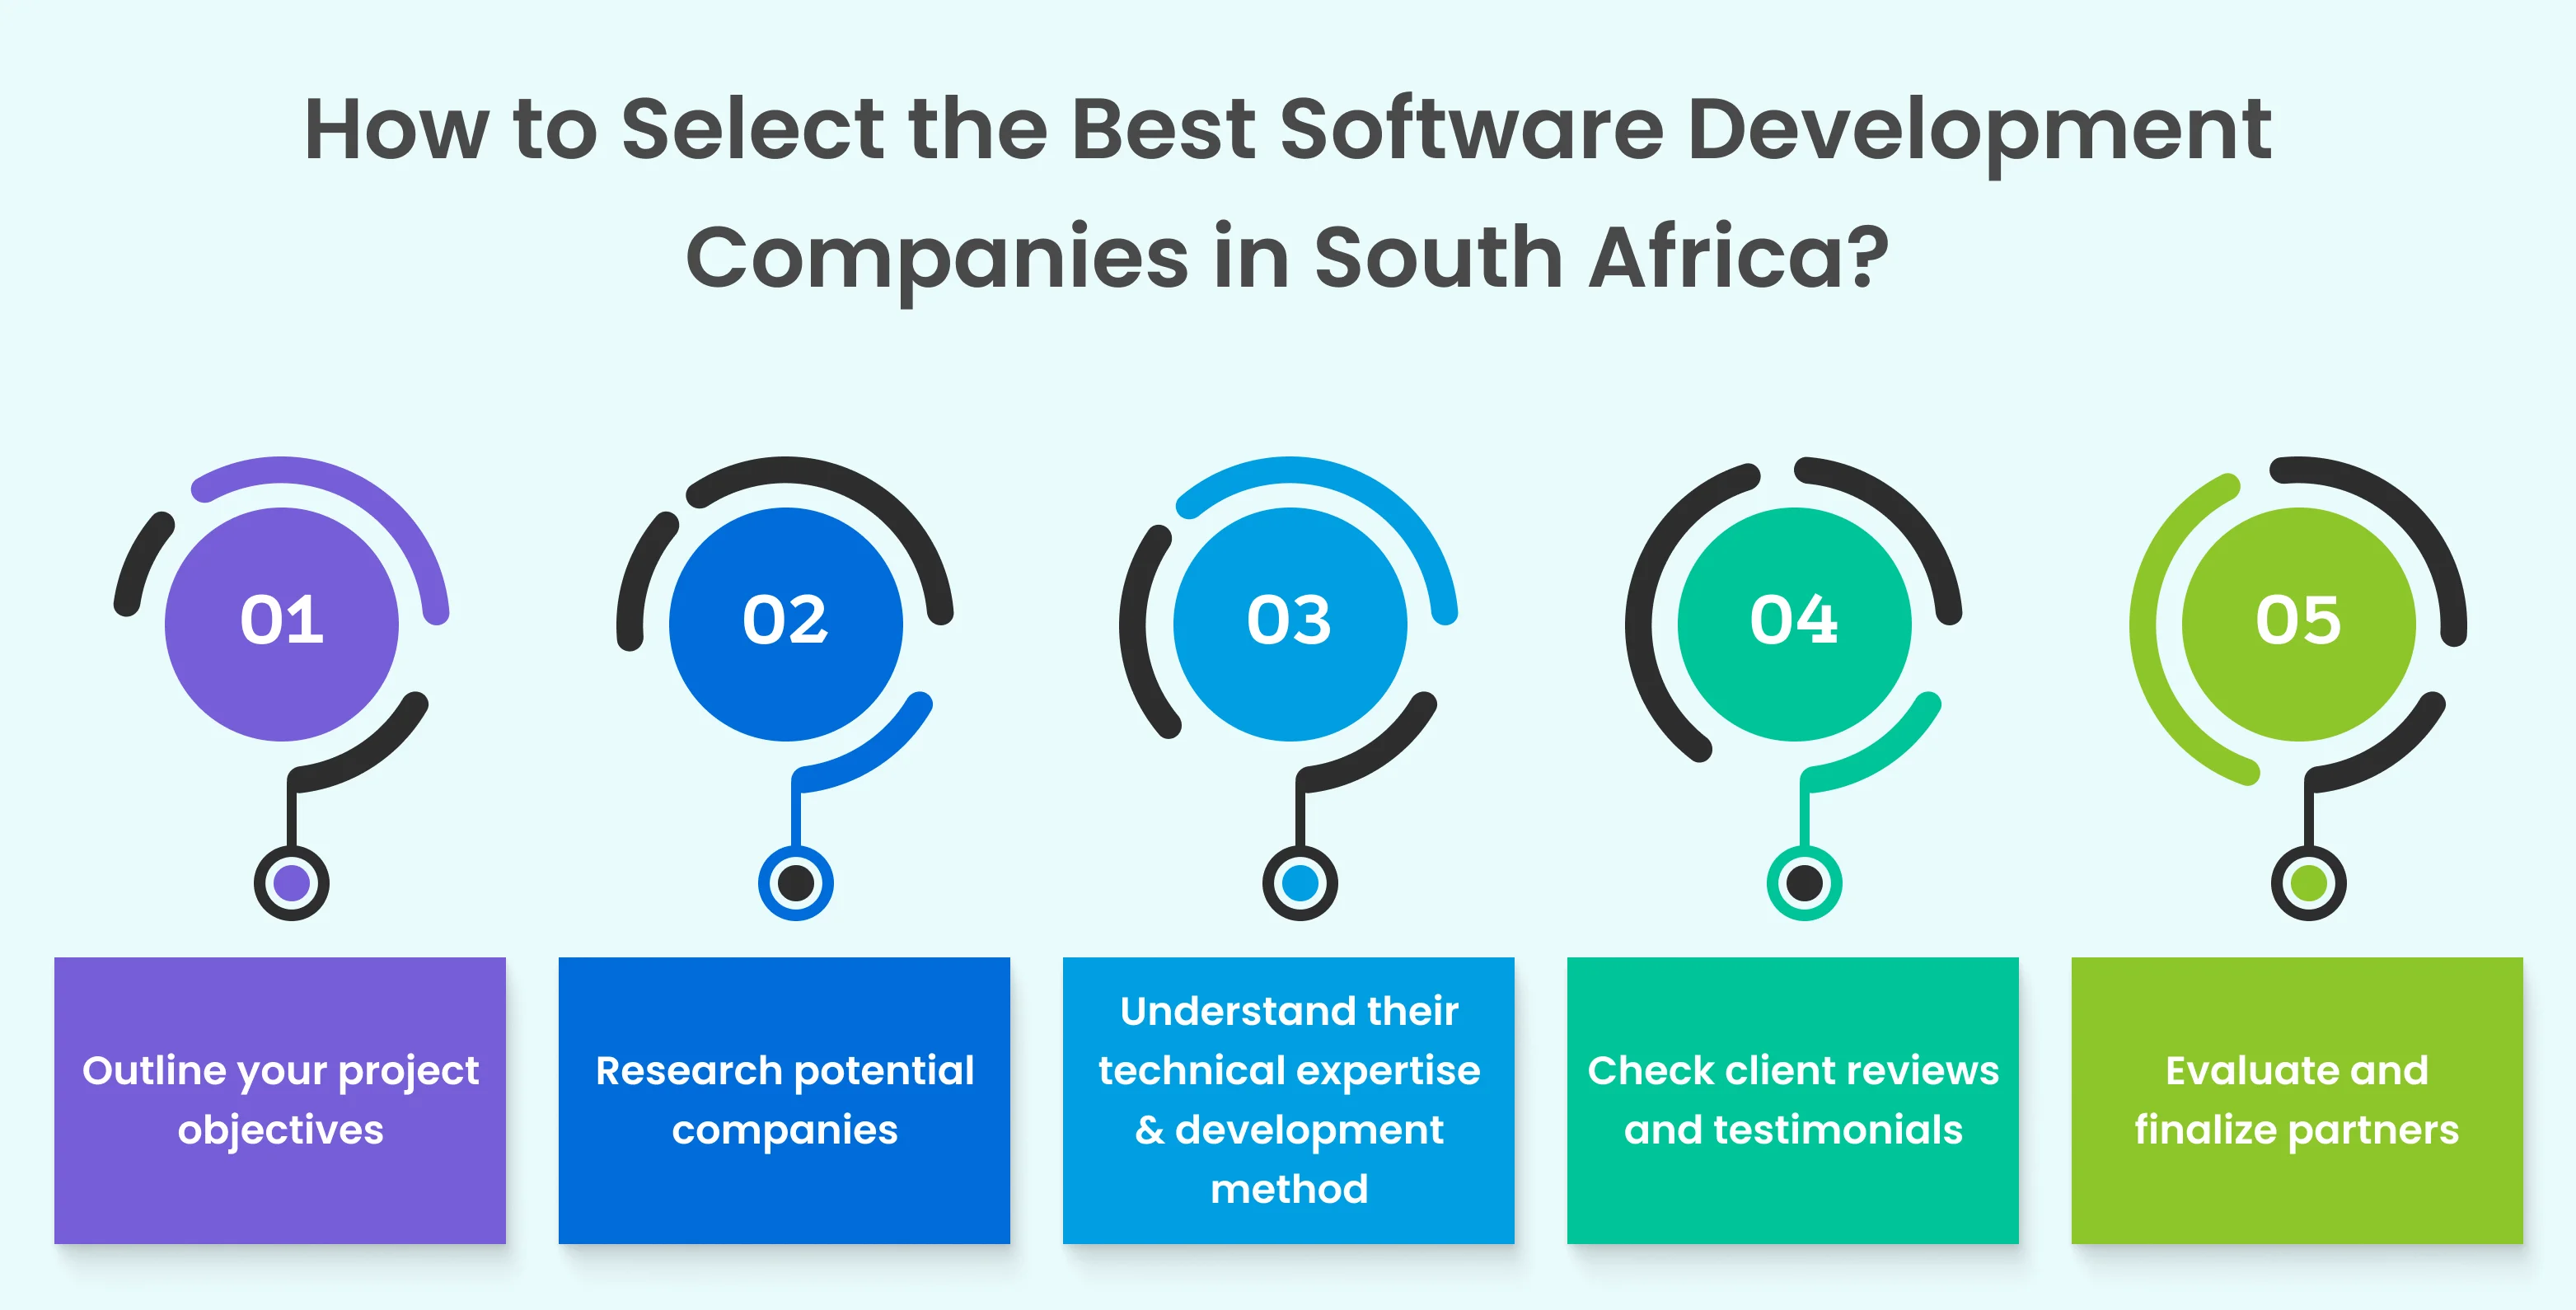 A Visual Representation of How to Select the Best Software Development Companies in South Africa?